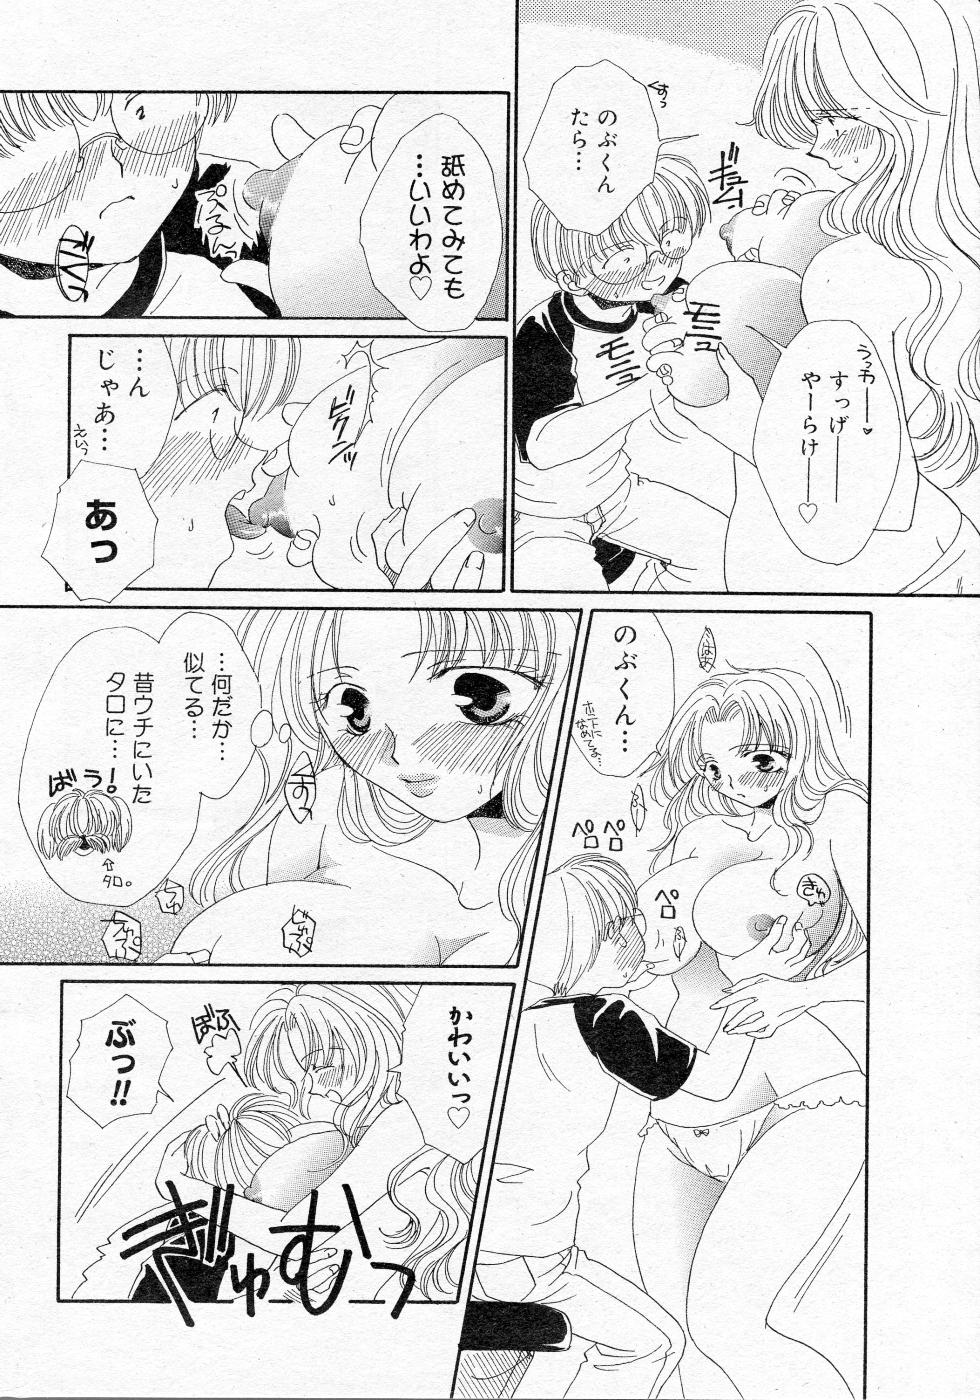 COMIC Angel Share Vol. 01 page 33 full